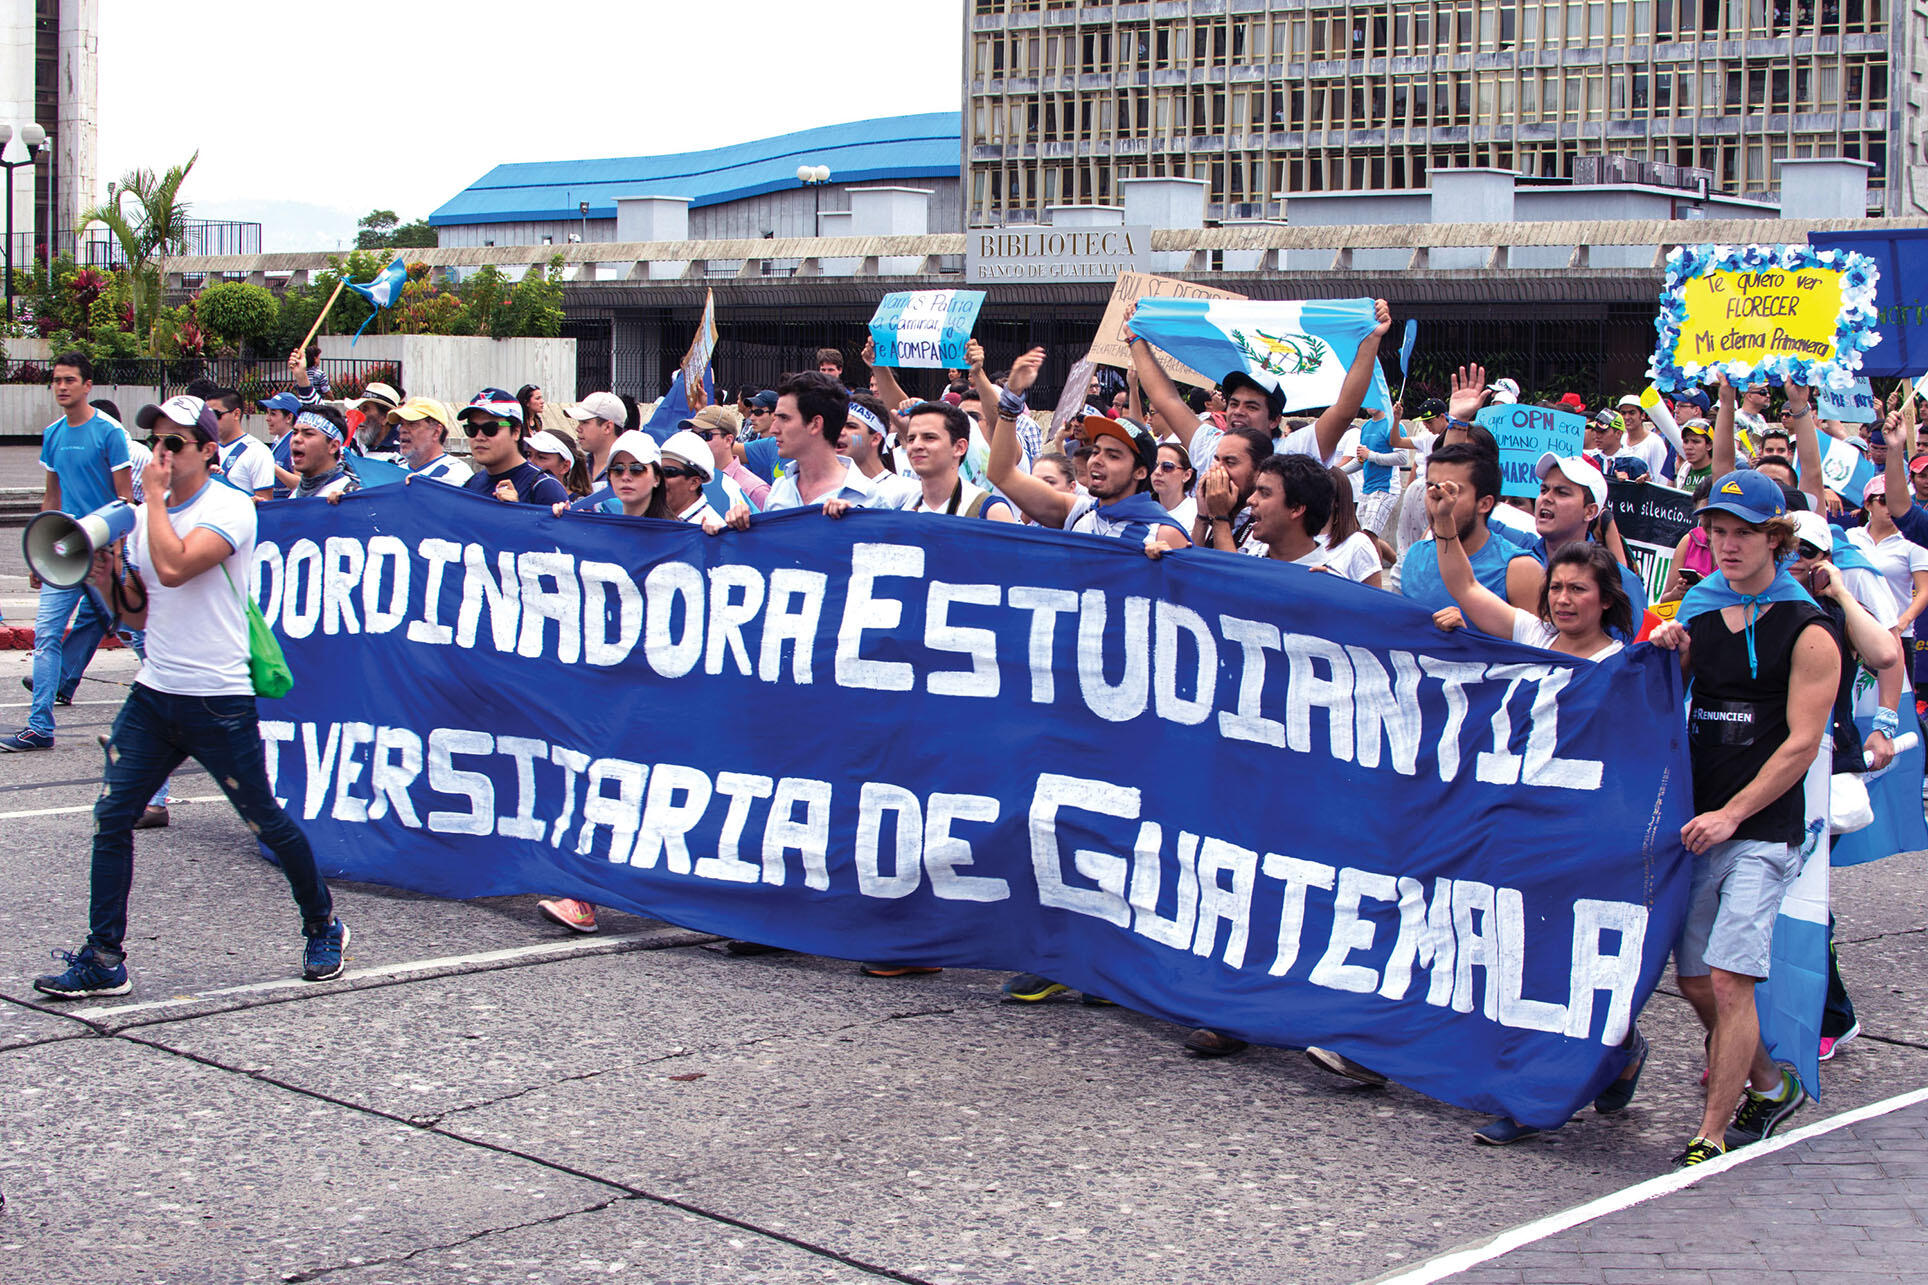 Universidad de Guatemala students with a banner identifying their school protest against President Otto Pérez Molina, who resigned a few days later in 2015. (Photo by hrvargas.)